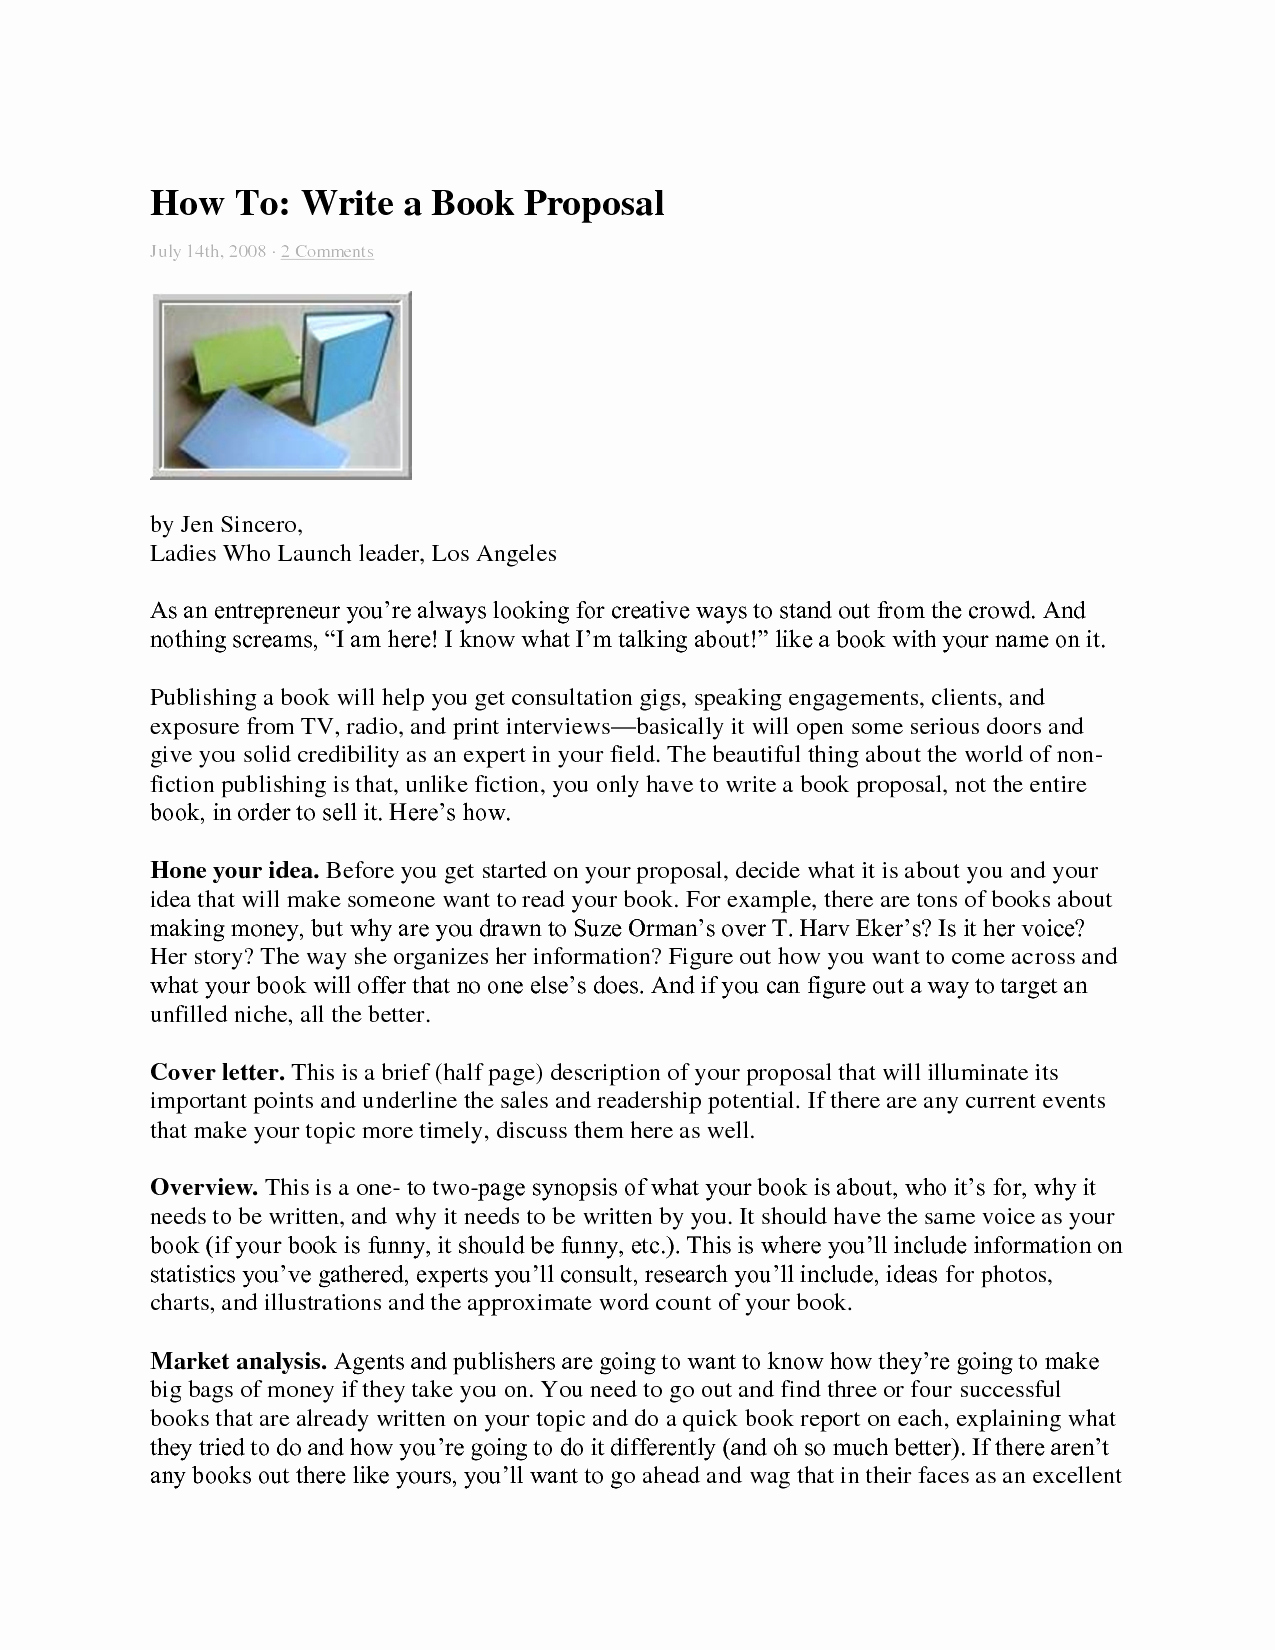 Nonfiction Book Proposal Template New Nonfiction Book Proposal Template Best Fiction Book